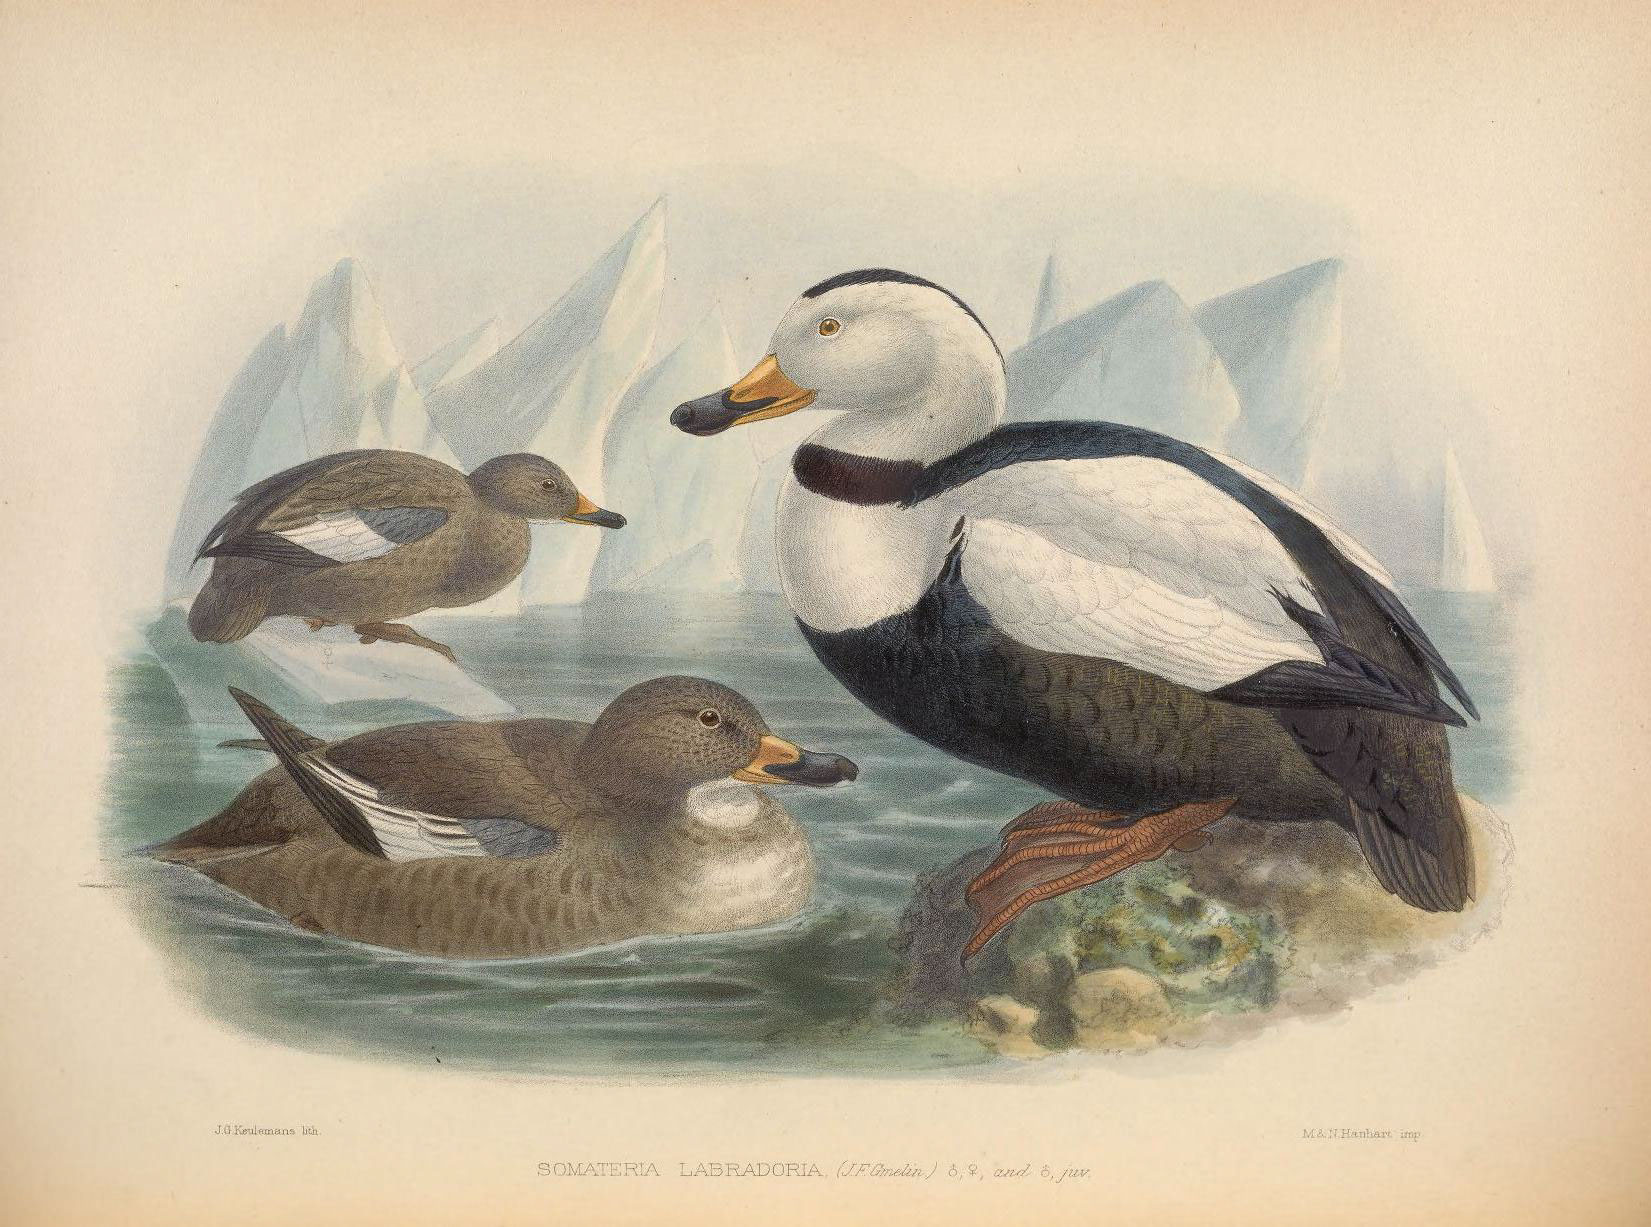 an antique print with ducks swimming in the water